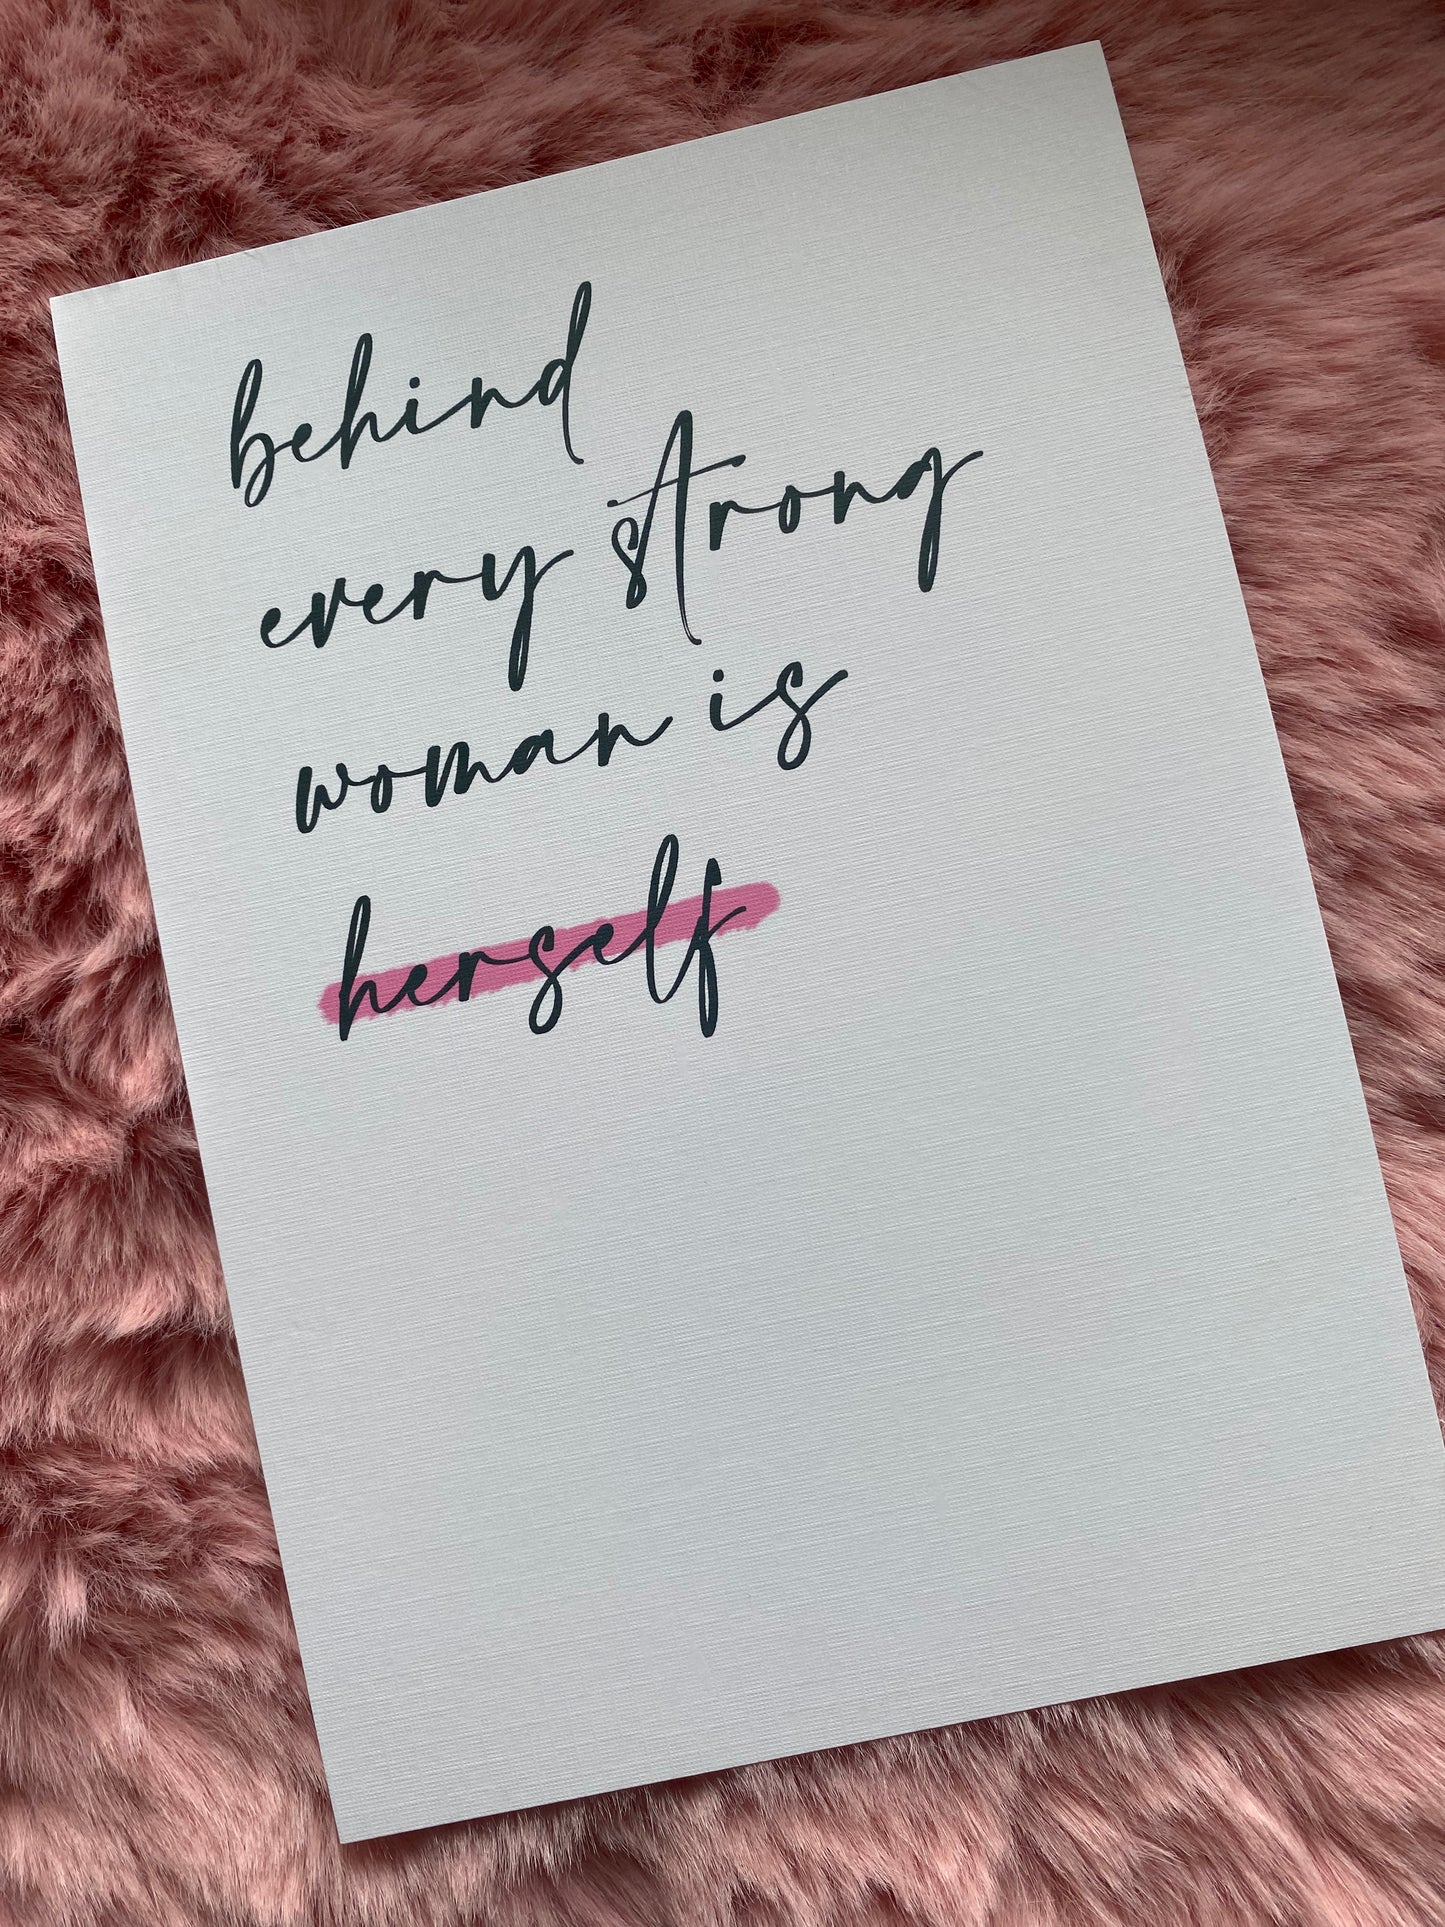 Behind every woman is herself quote print feminist gifts